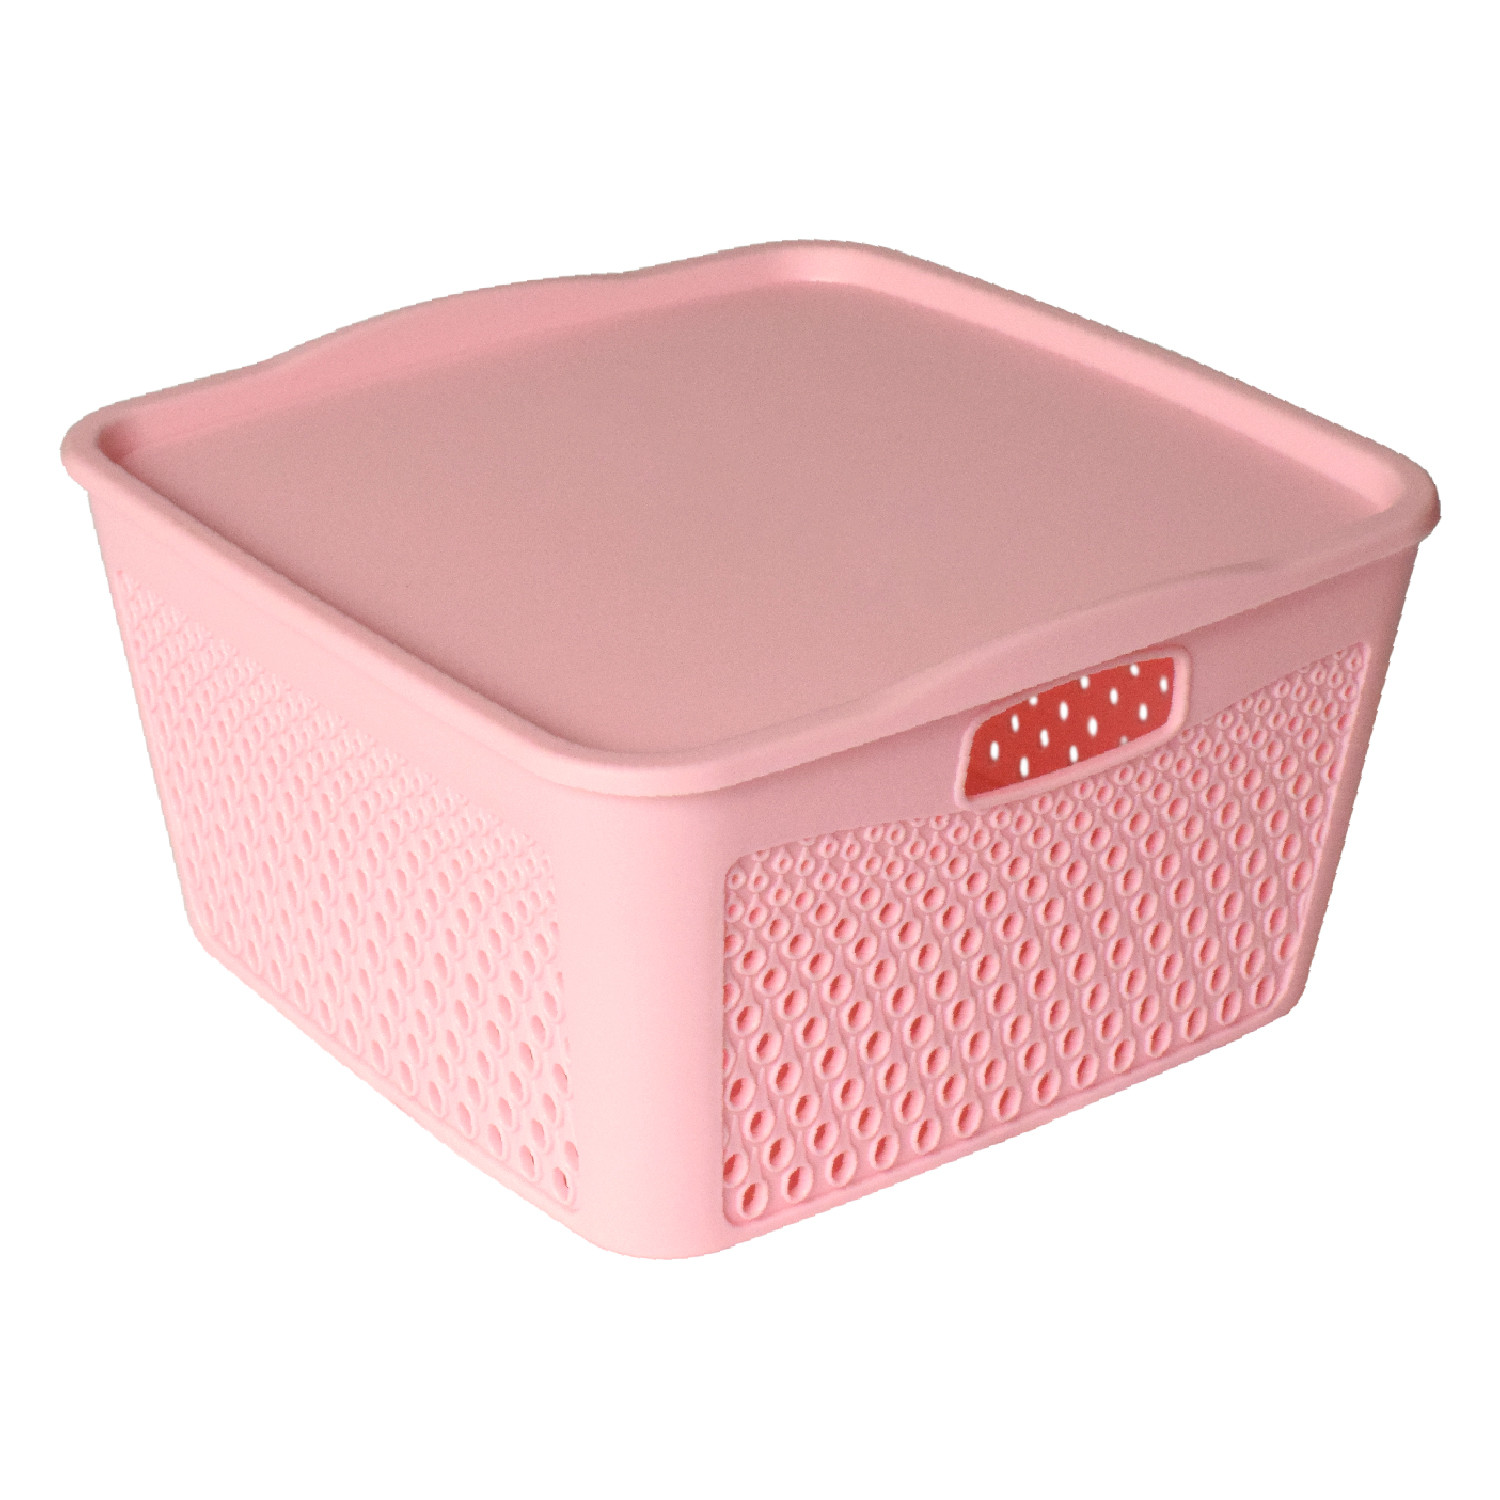 Kuber Industries Netted Design Unbreakable Multipurpose Square Shape Plastic Storage Baskets with lid Small, Medium, Large Pack of 3 (Pink)